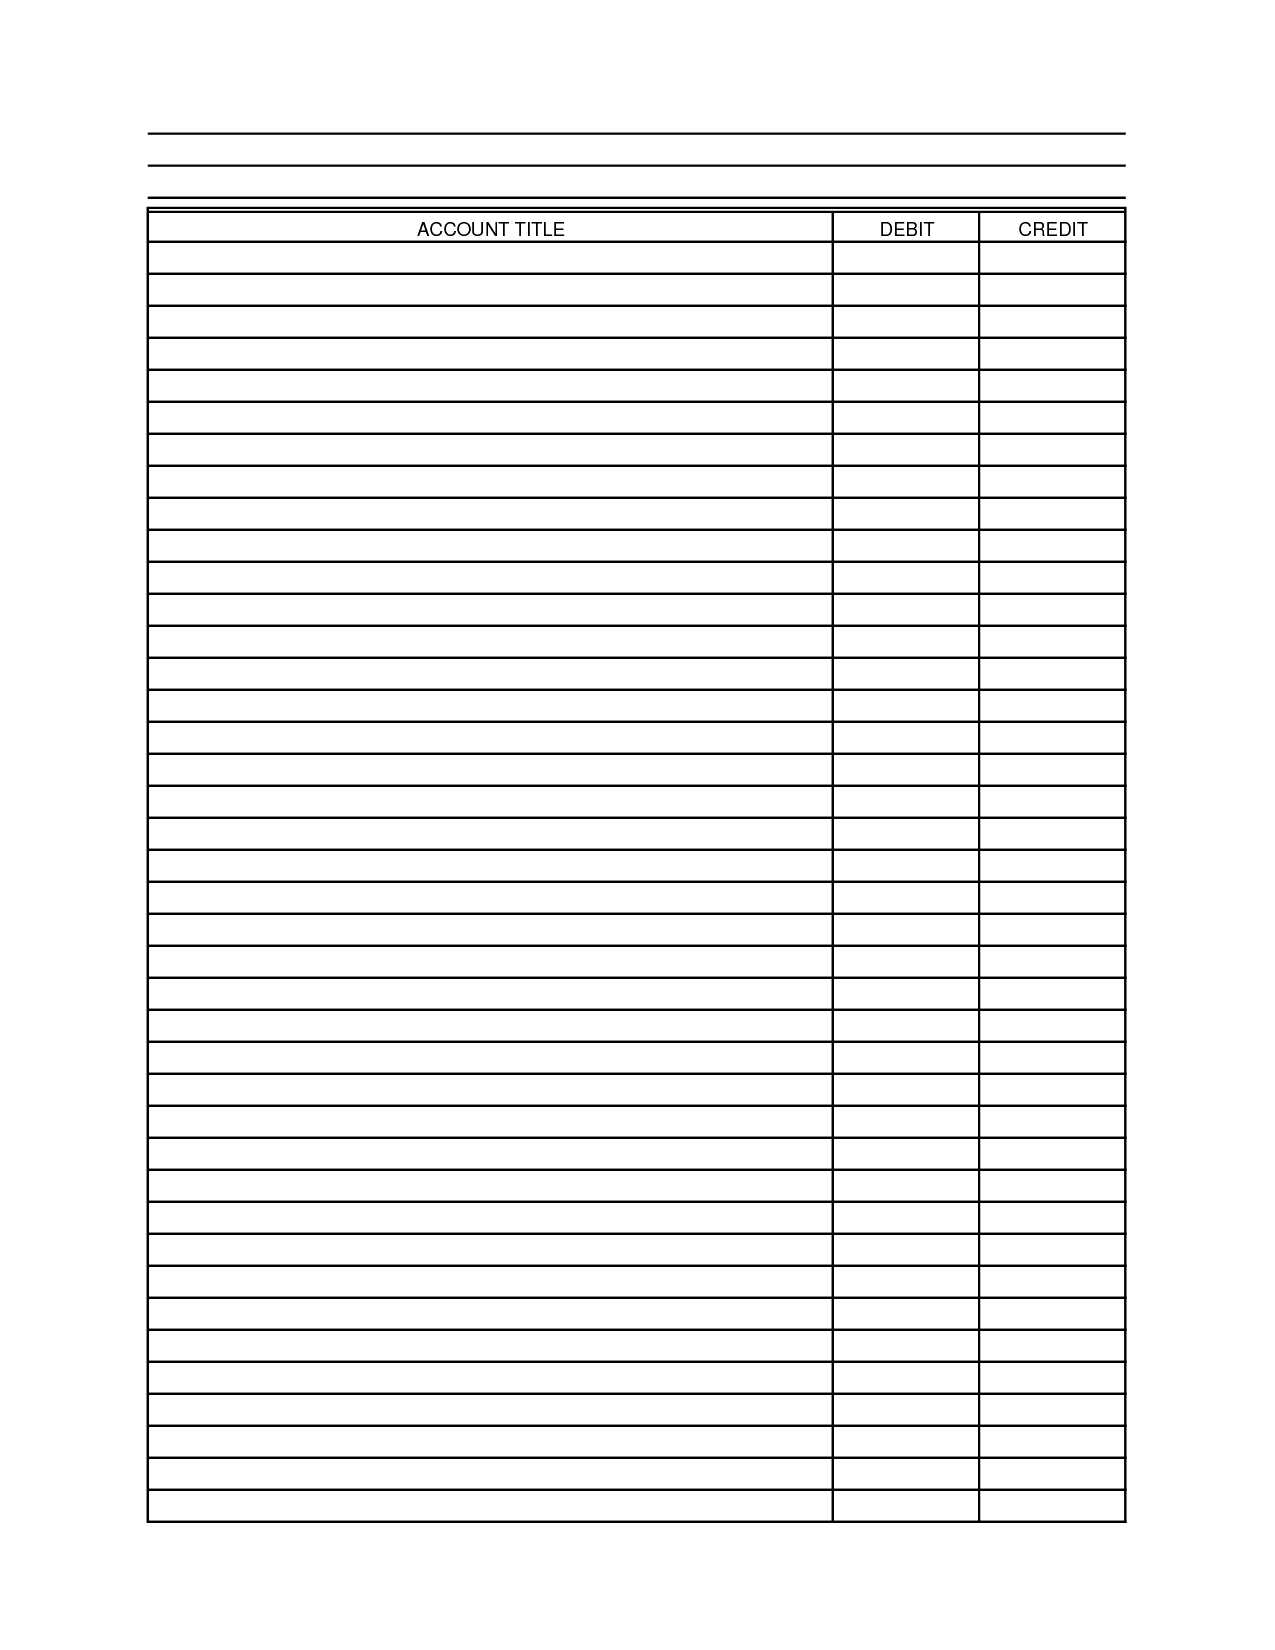 Balancing A Checkbook Worksheet for Students and Accounting Sheets Free Ozilmanoof